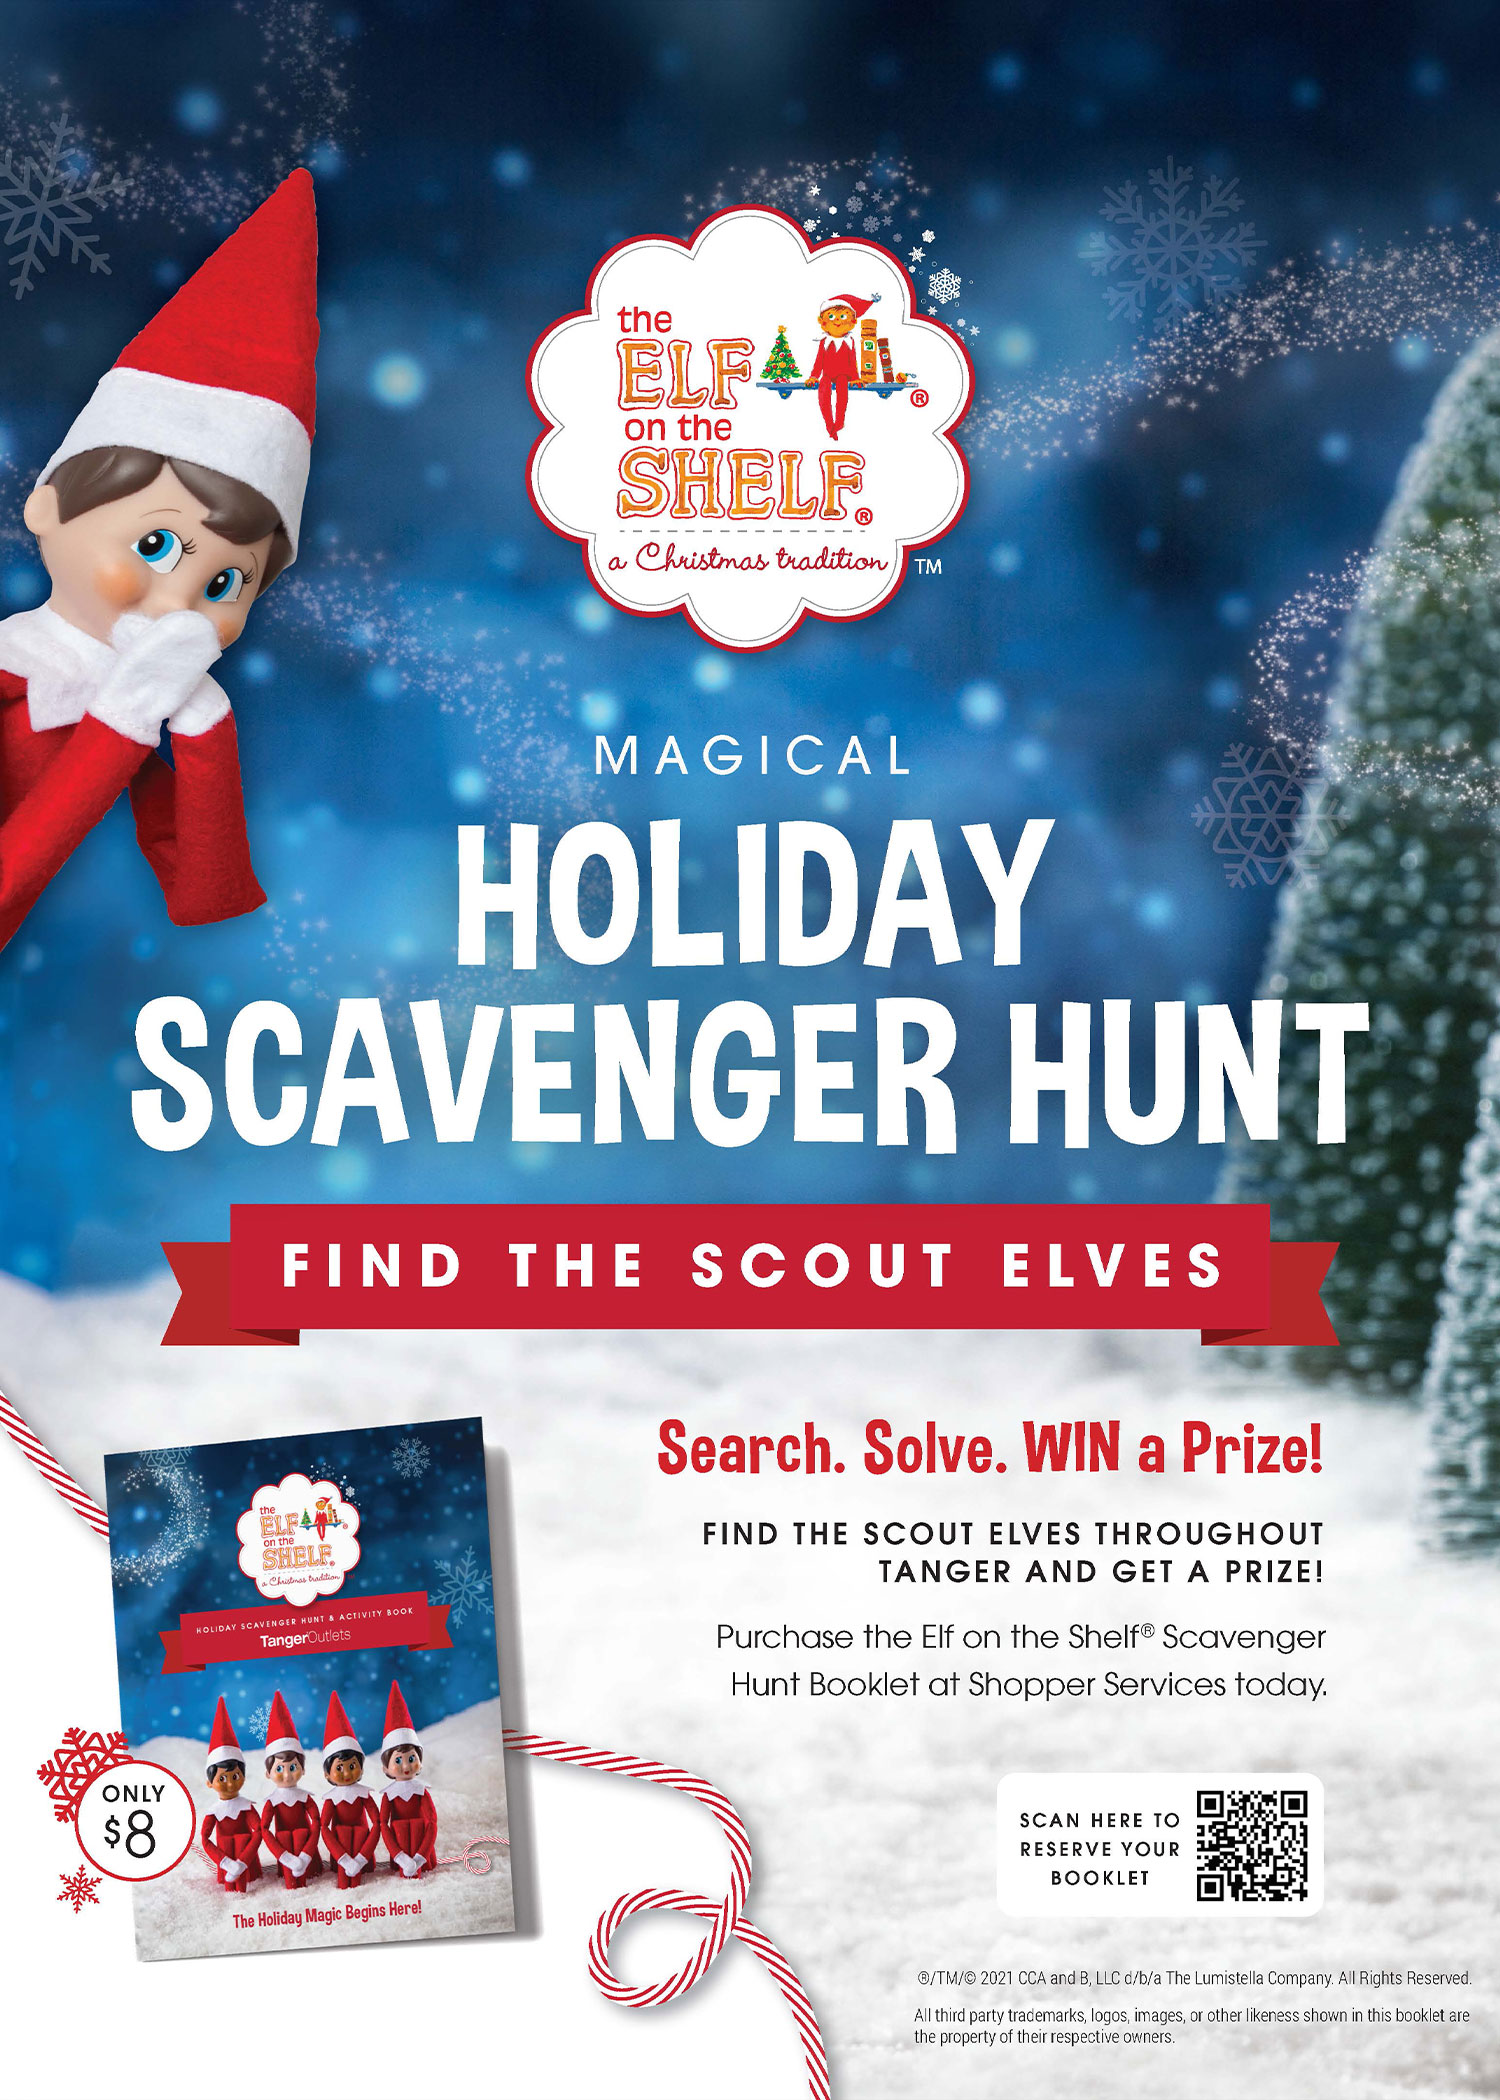 Tanger Outlets and Elf on the Shelf present a Magical Scavenger Hunt